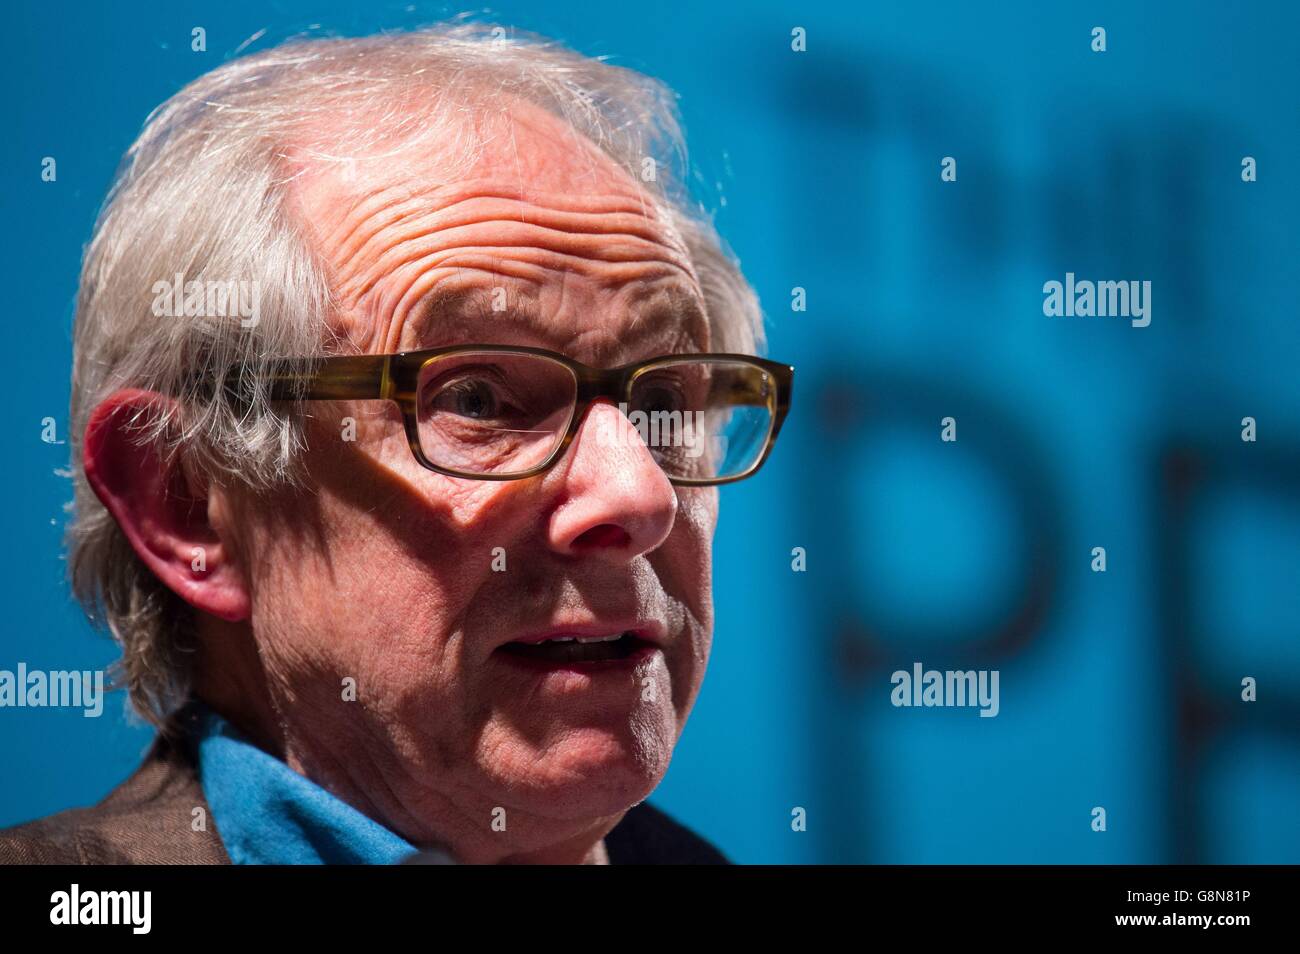 Ken Loach speaks during the Save Our NHS rally, at Conway Hall in London, organised by the People's Assembly, to defend the NHS and support junior doctors following the government's decision to impose new contracts. Stock Photo